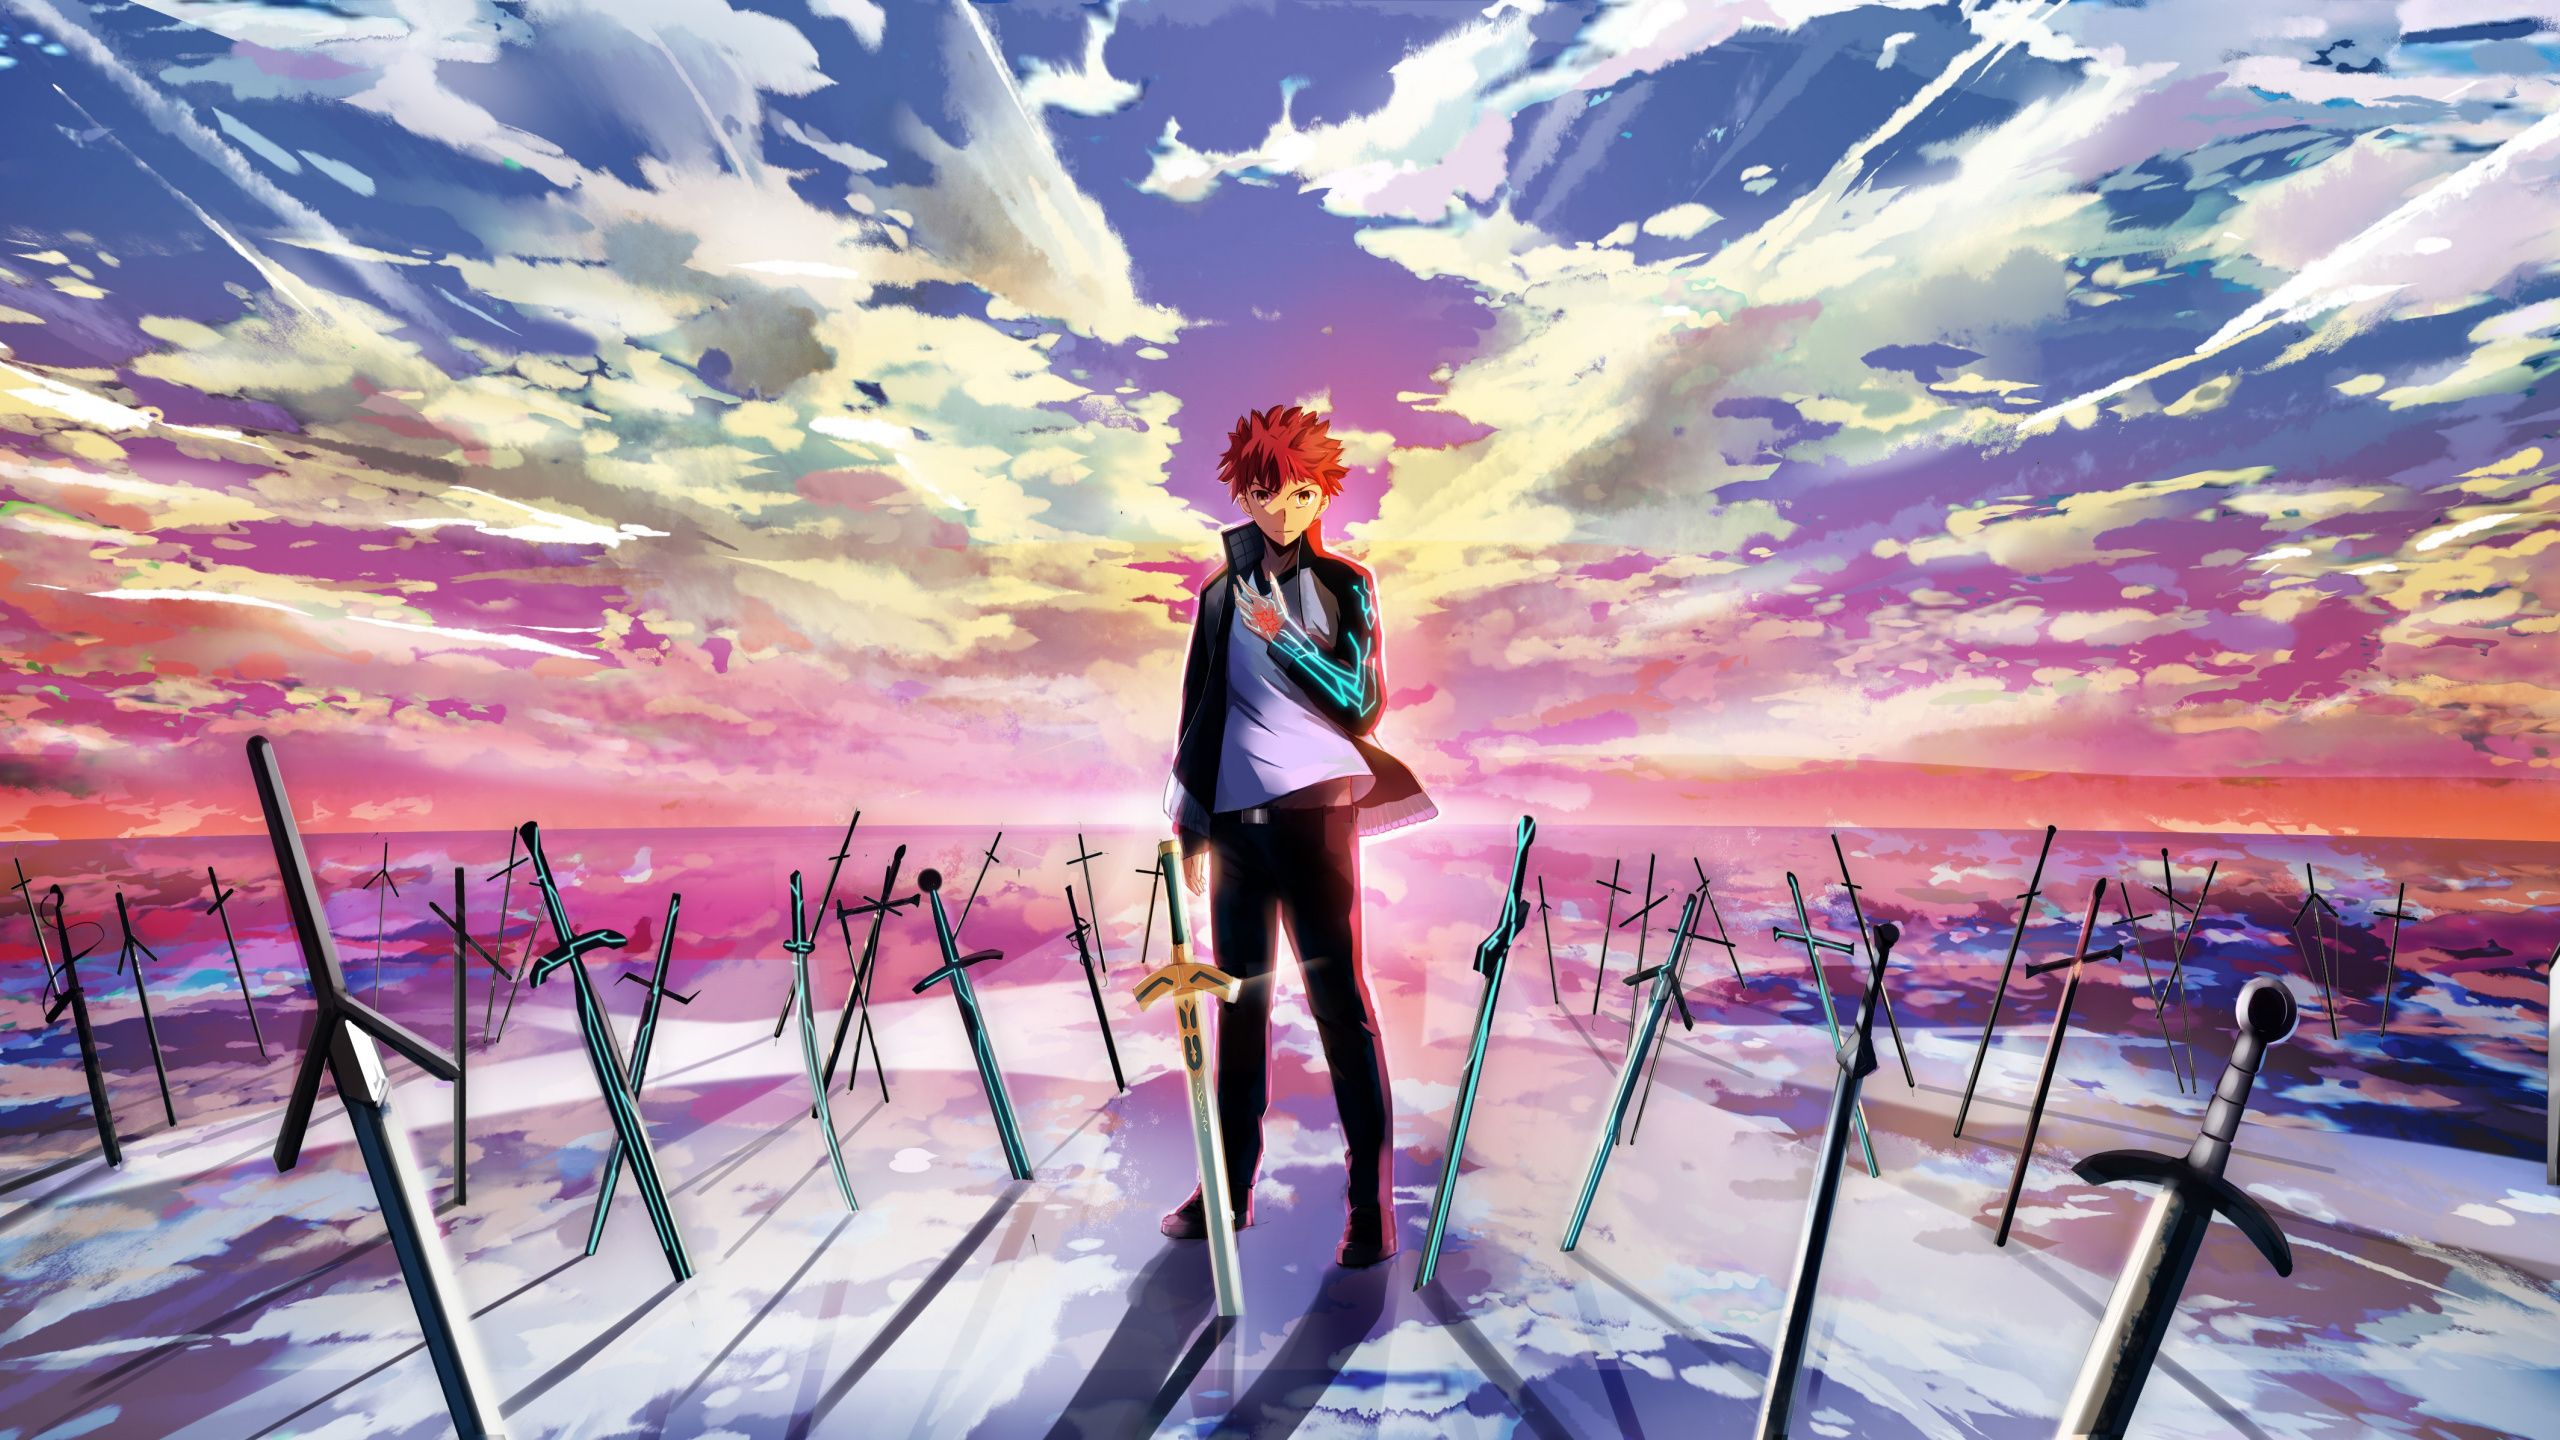 Download Fate Stay Night, Anime Boy, Swords, Sunset, Artwork